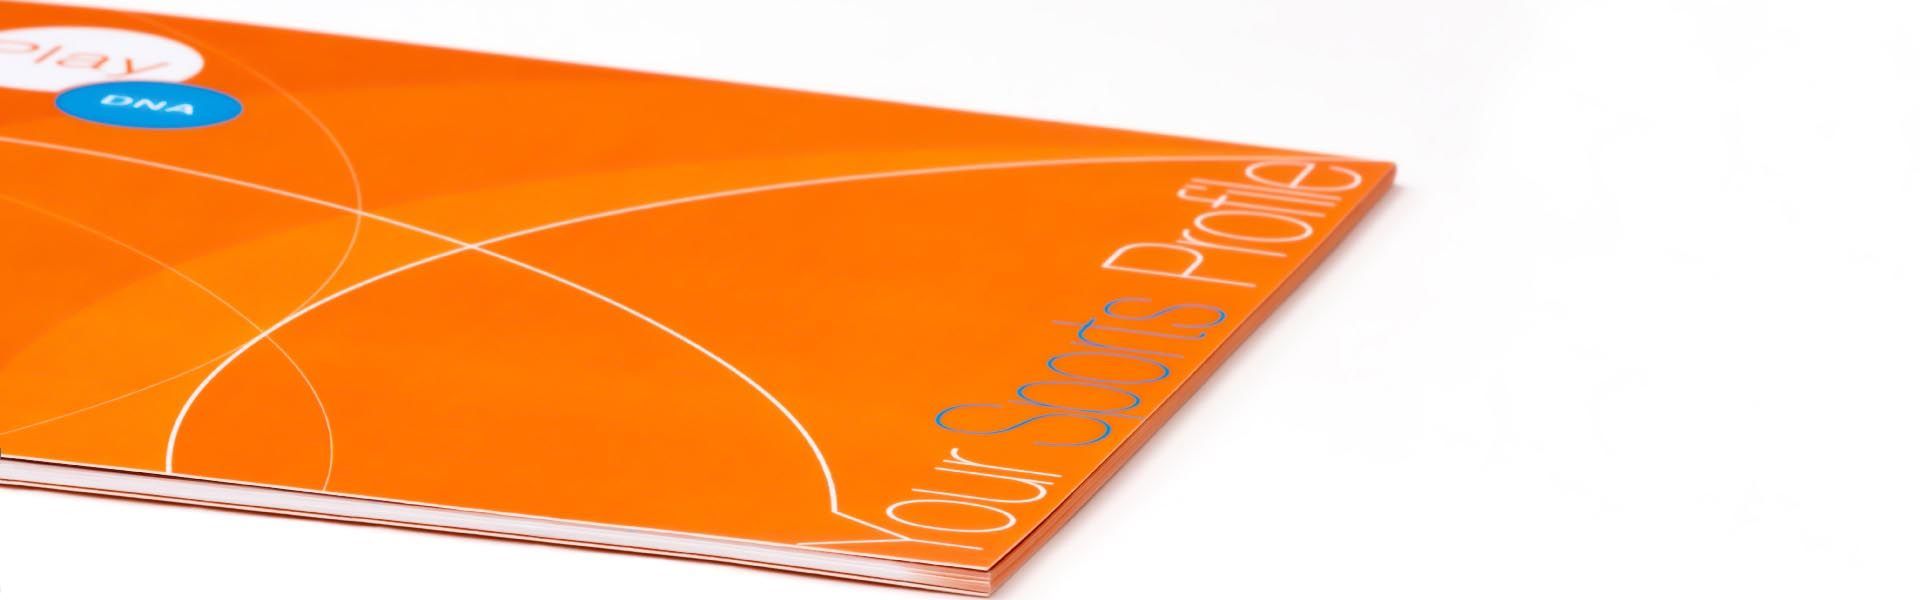 an orange book with the words your sports profile on it